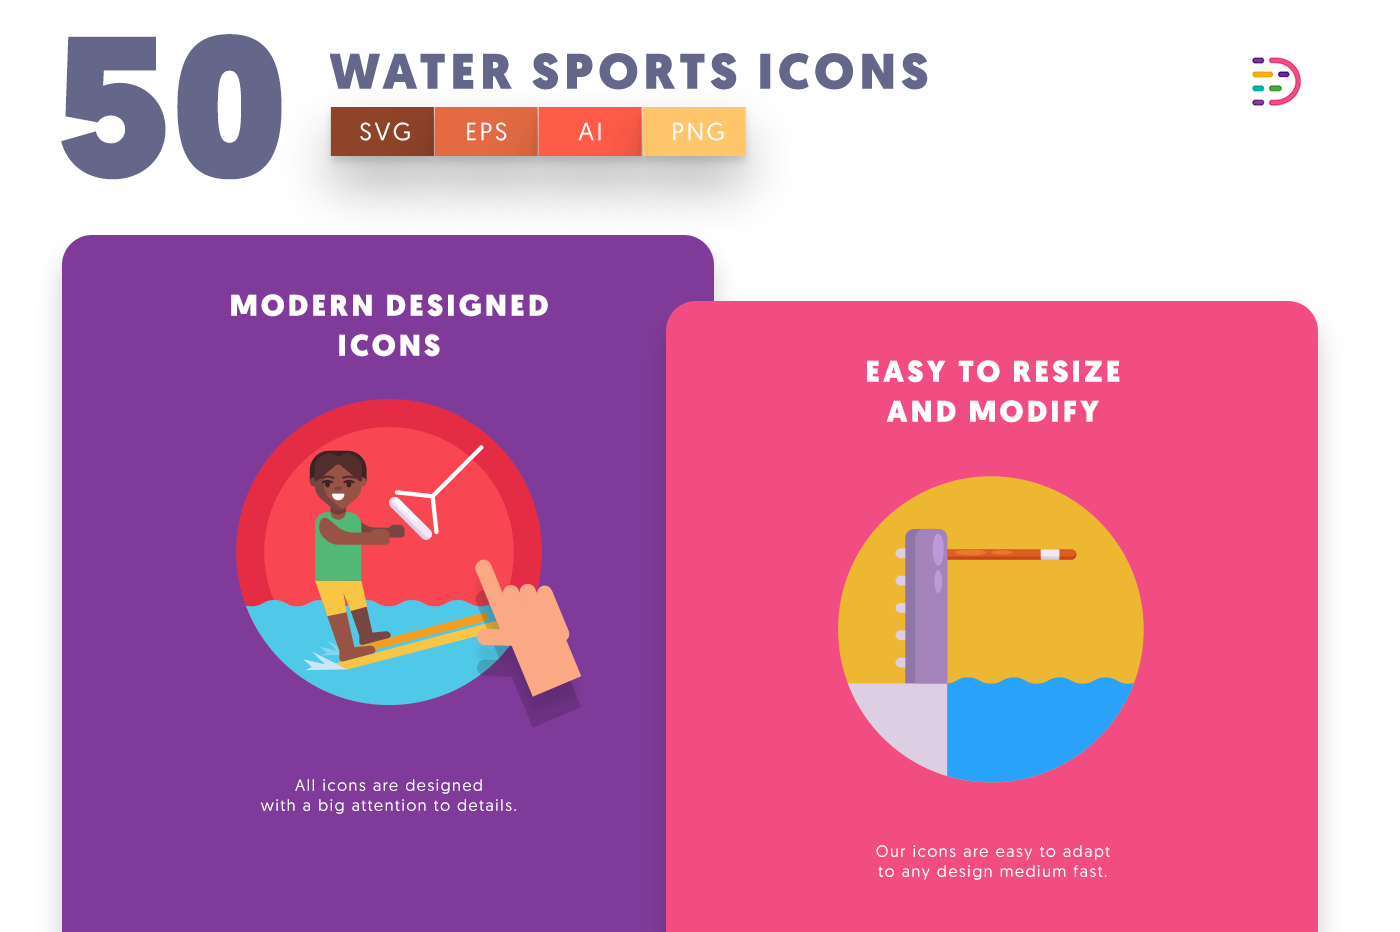 Water Sports icons